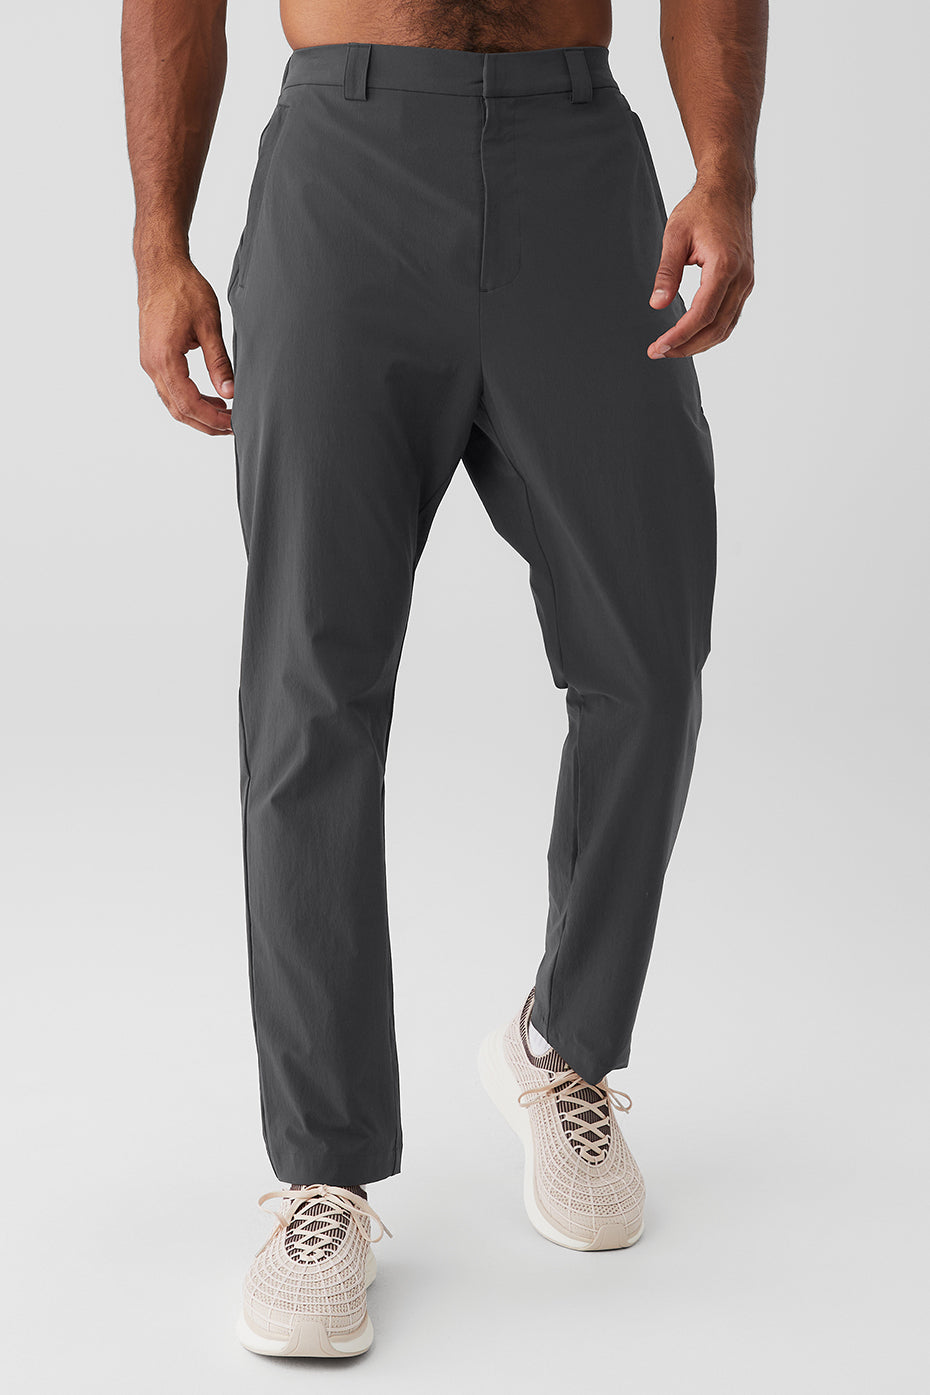 Conquer React Performance Pant - Navy